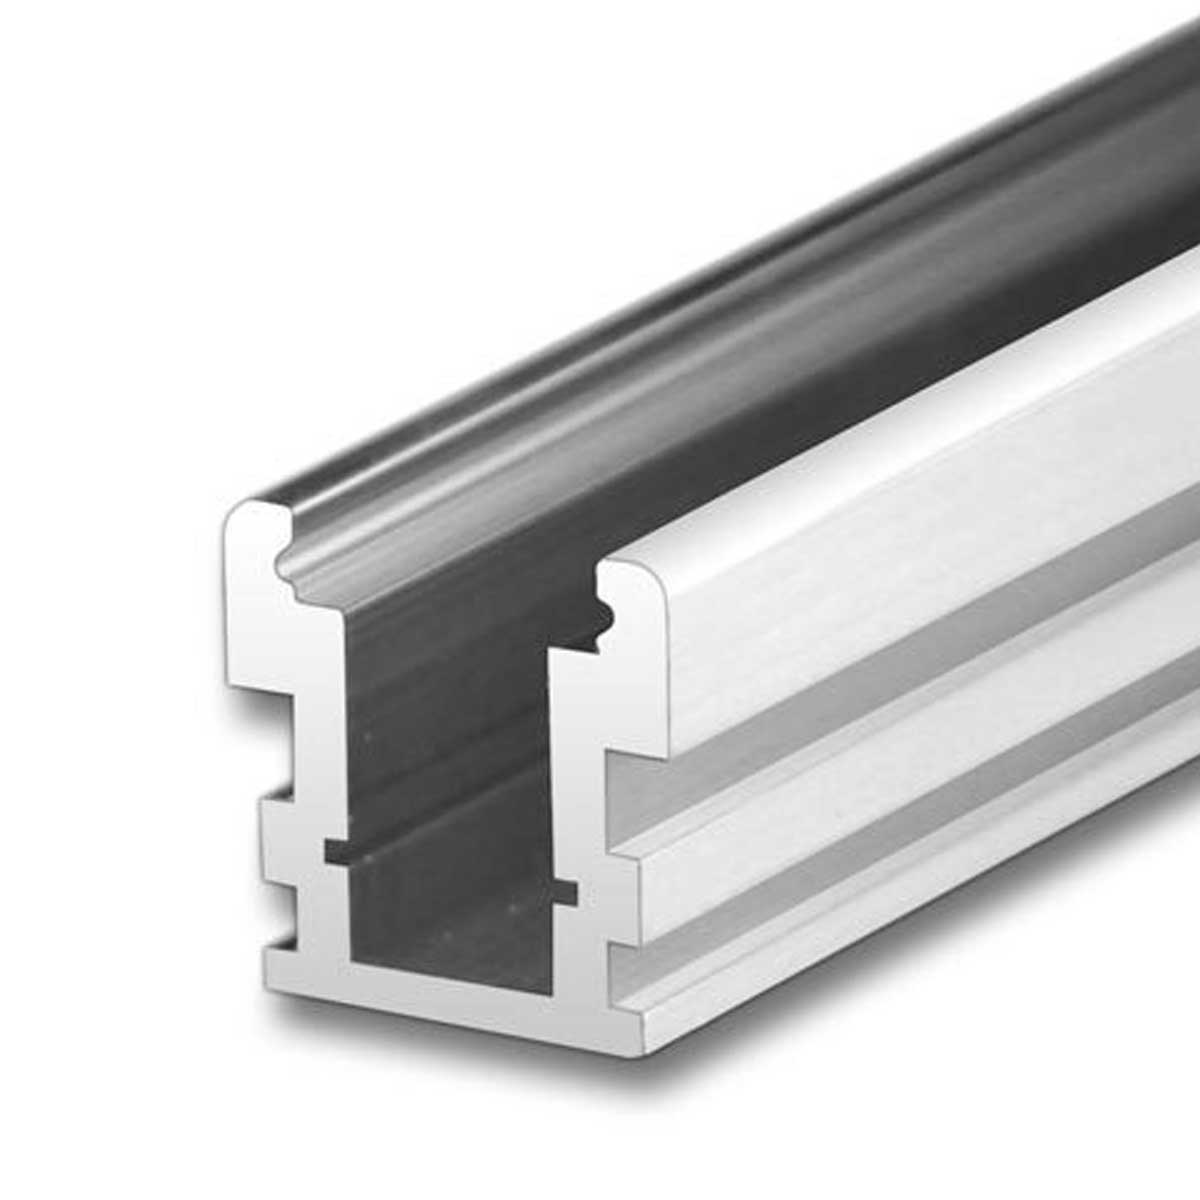 1000 Aluminium Slotted Channel Manufacturers, Suppliers in Jaipur